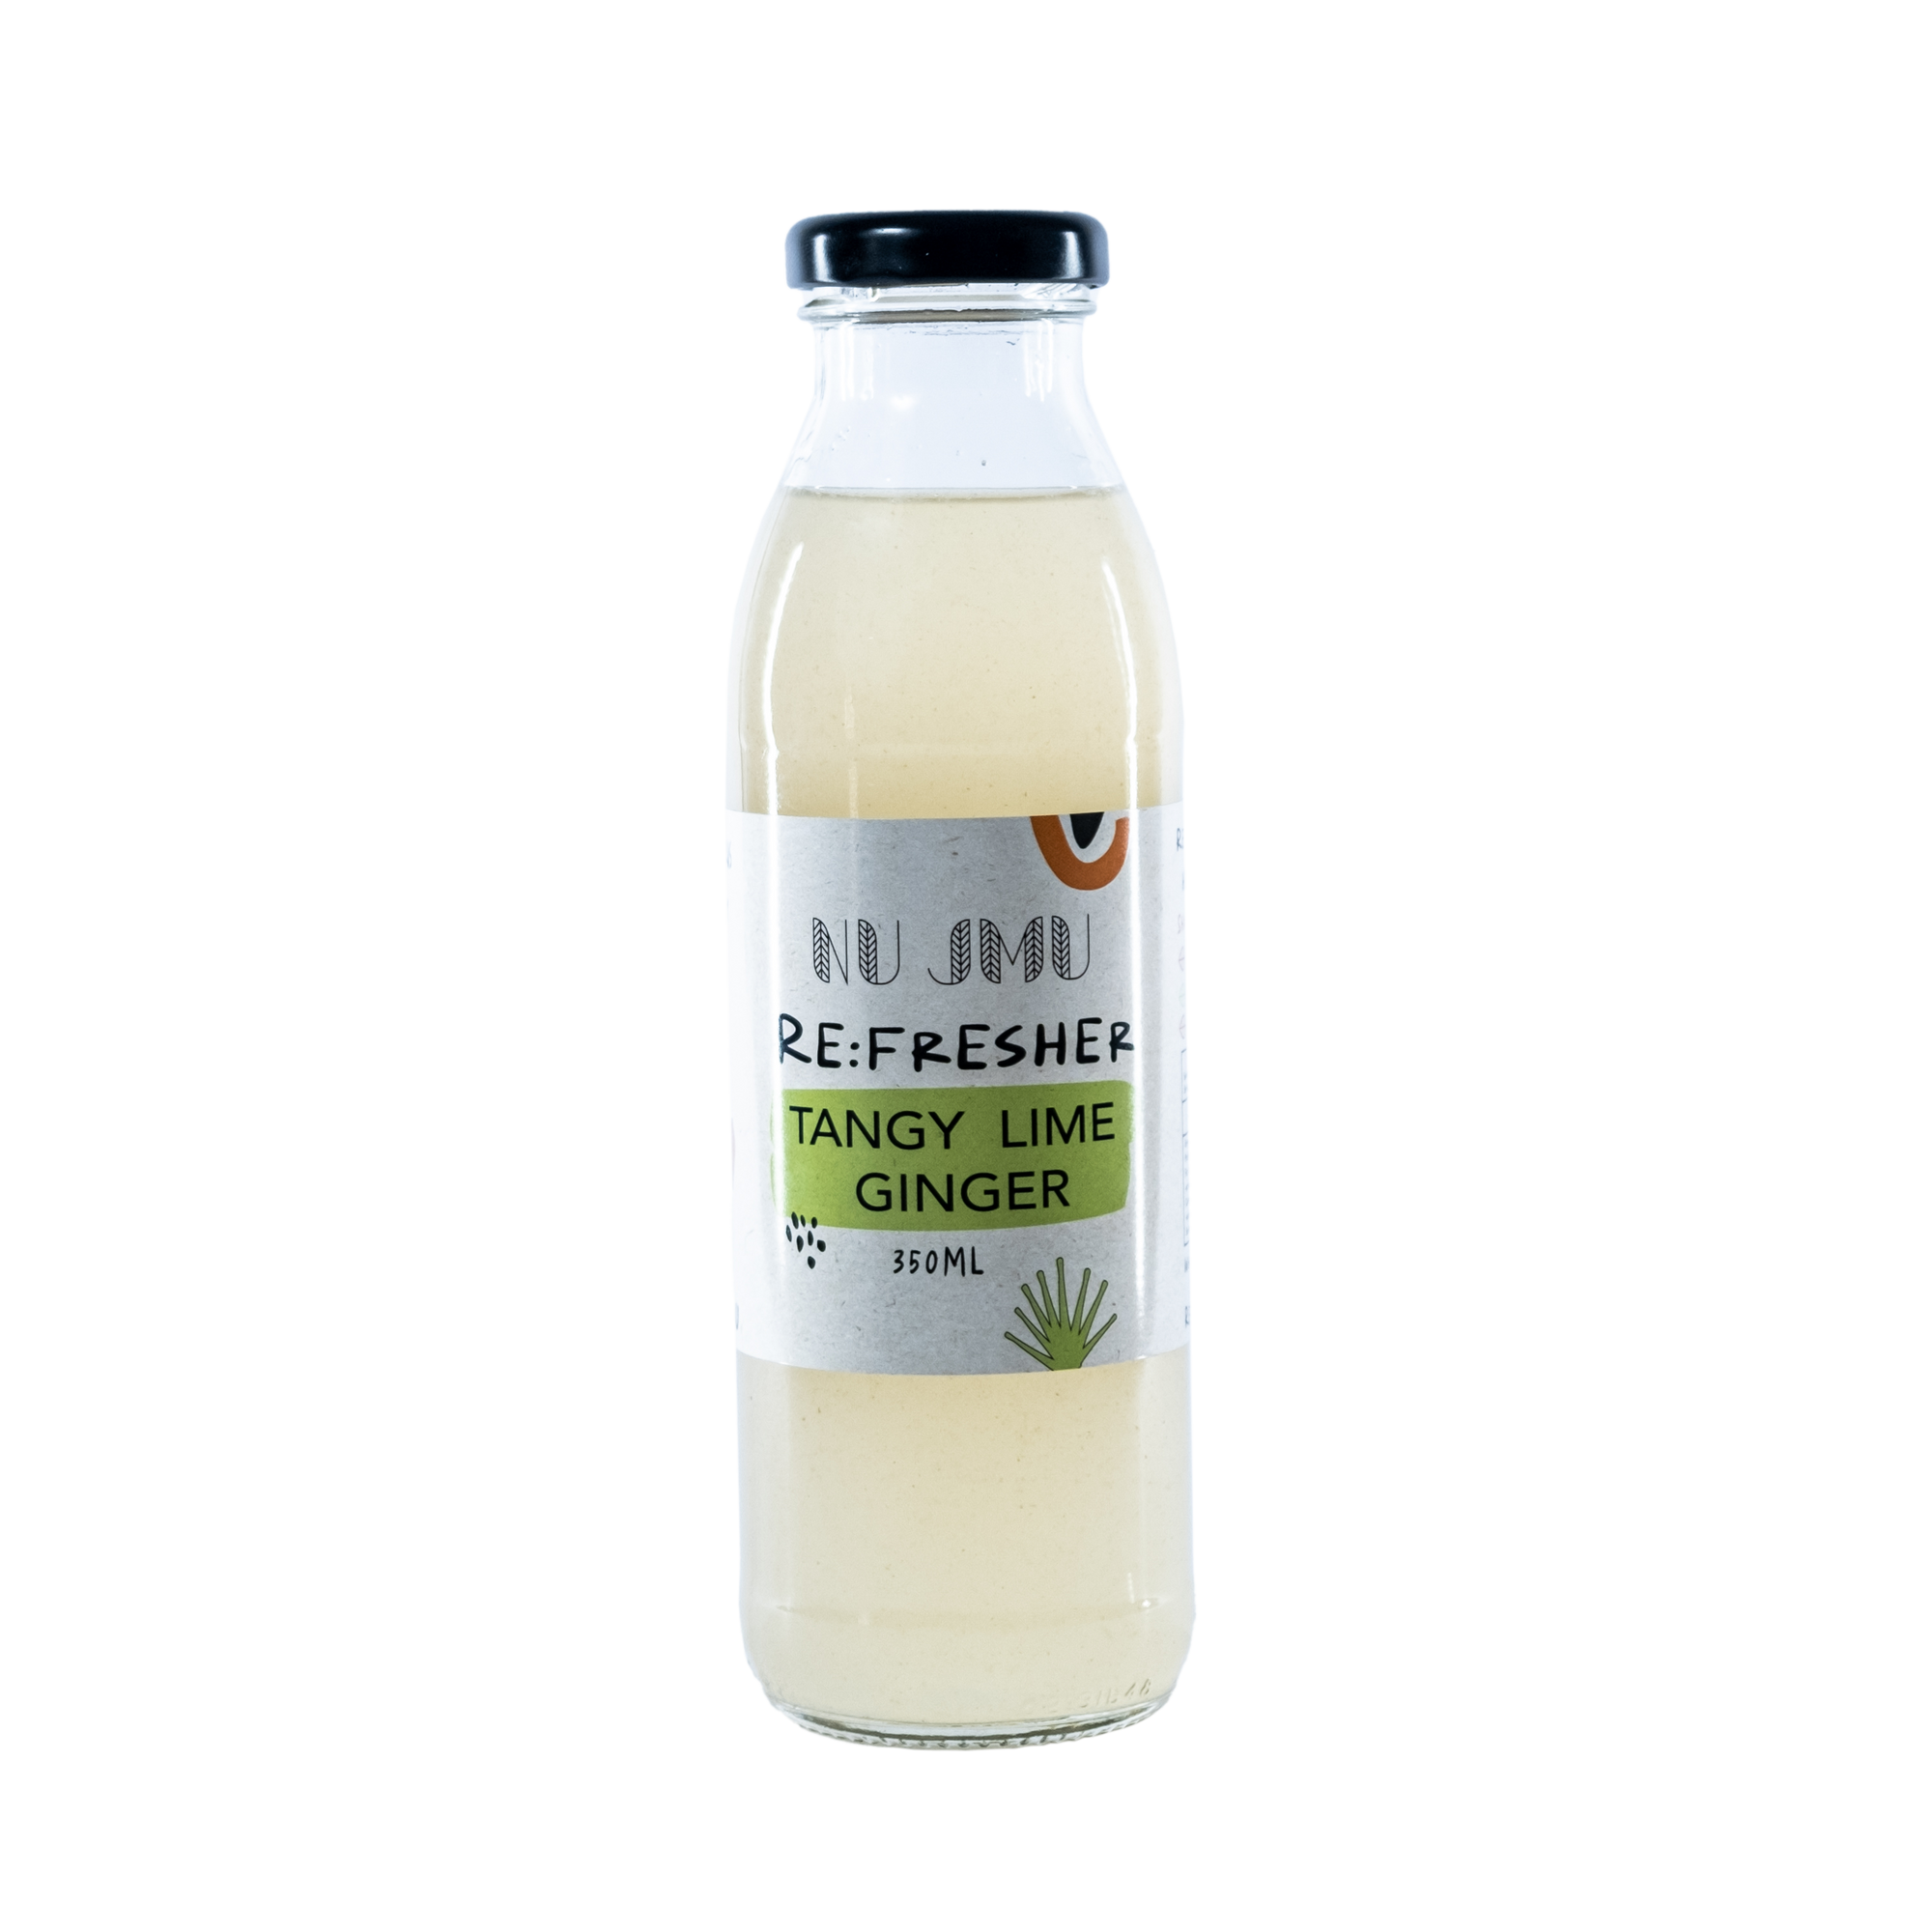 Re:fresher Tangy Lime Ginger Drink